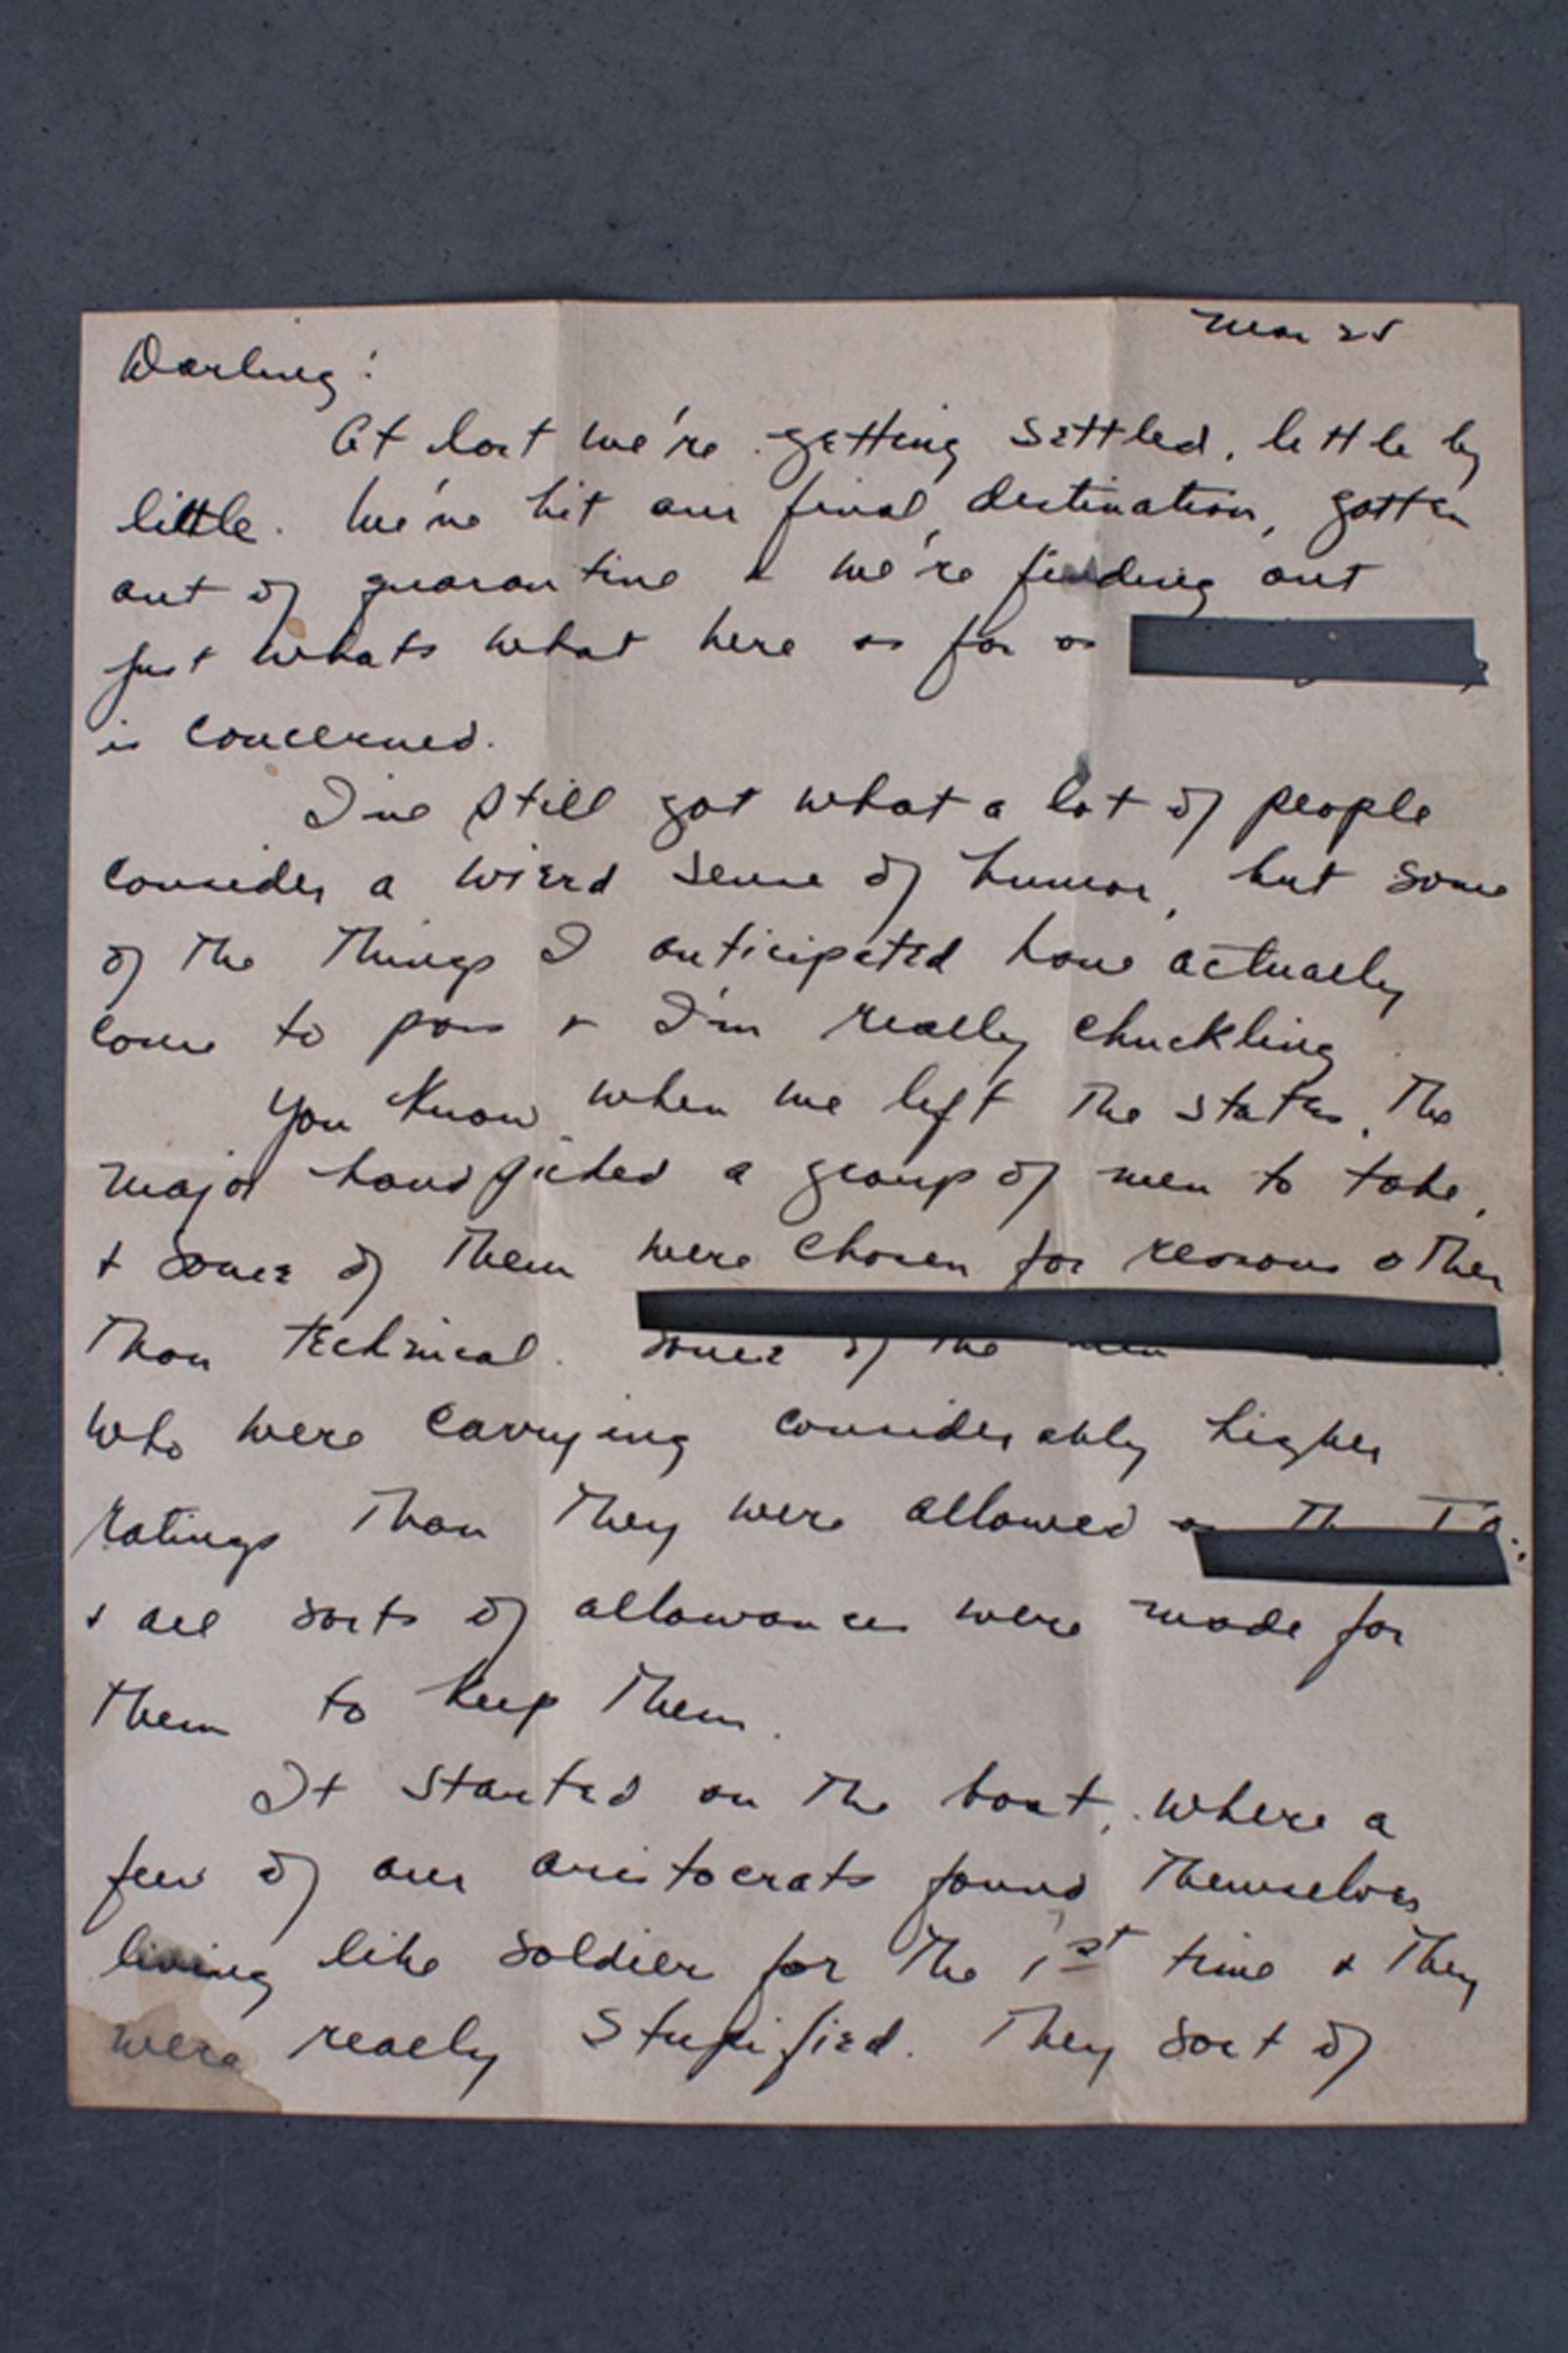 © Marianne Ingleby - Hand censored letter from my grandfather to my grandmother while he was in the war in the Pacific.